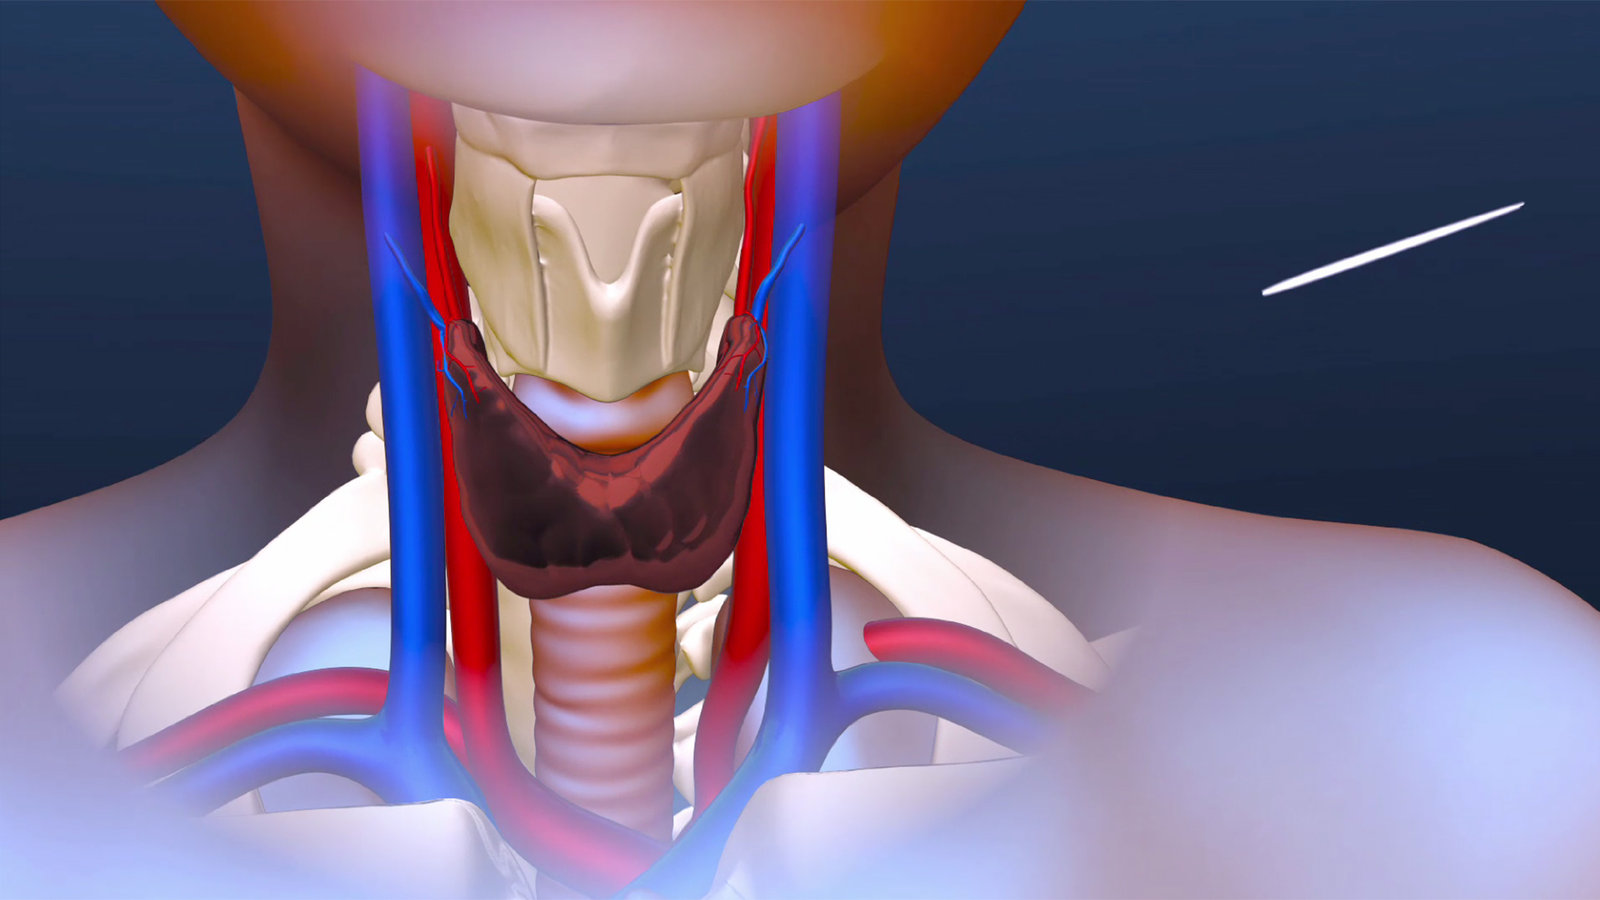 Still from an animation I created showing a new surgical technique